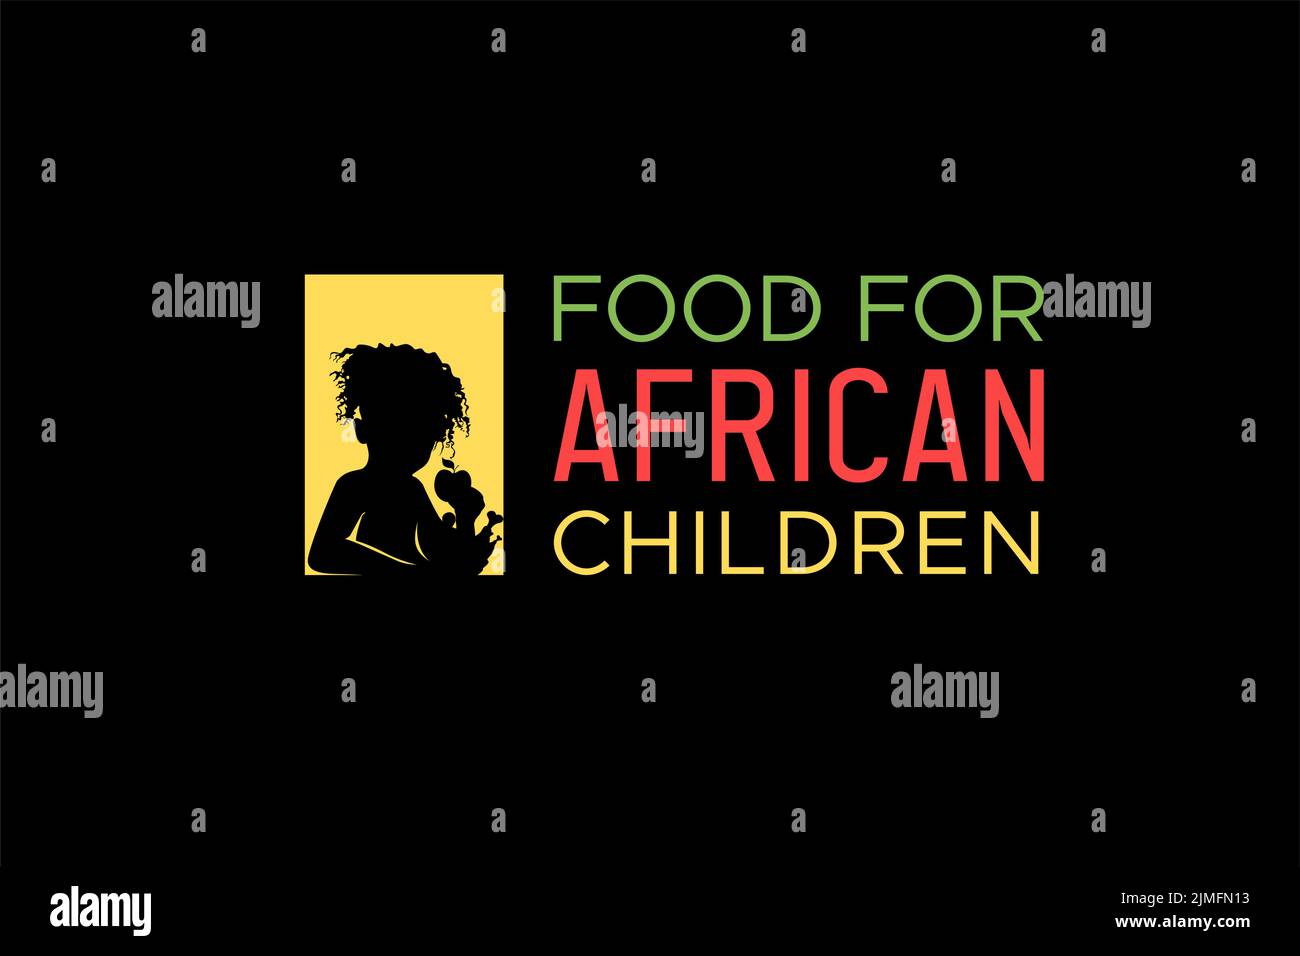 Silhouette of African Children Eat Fruit and Meat logo design Stock Vector